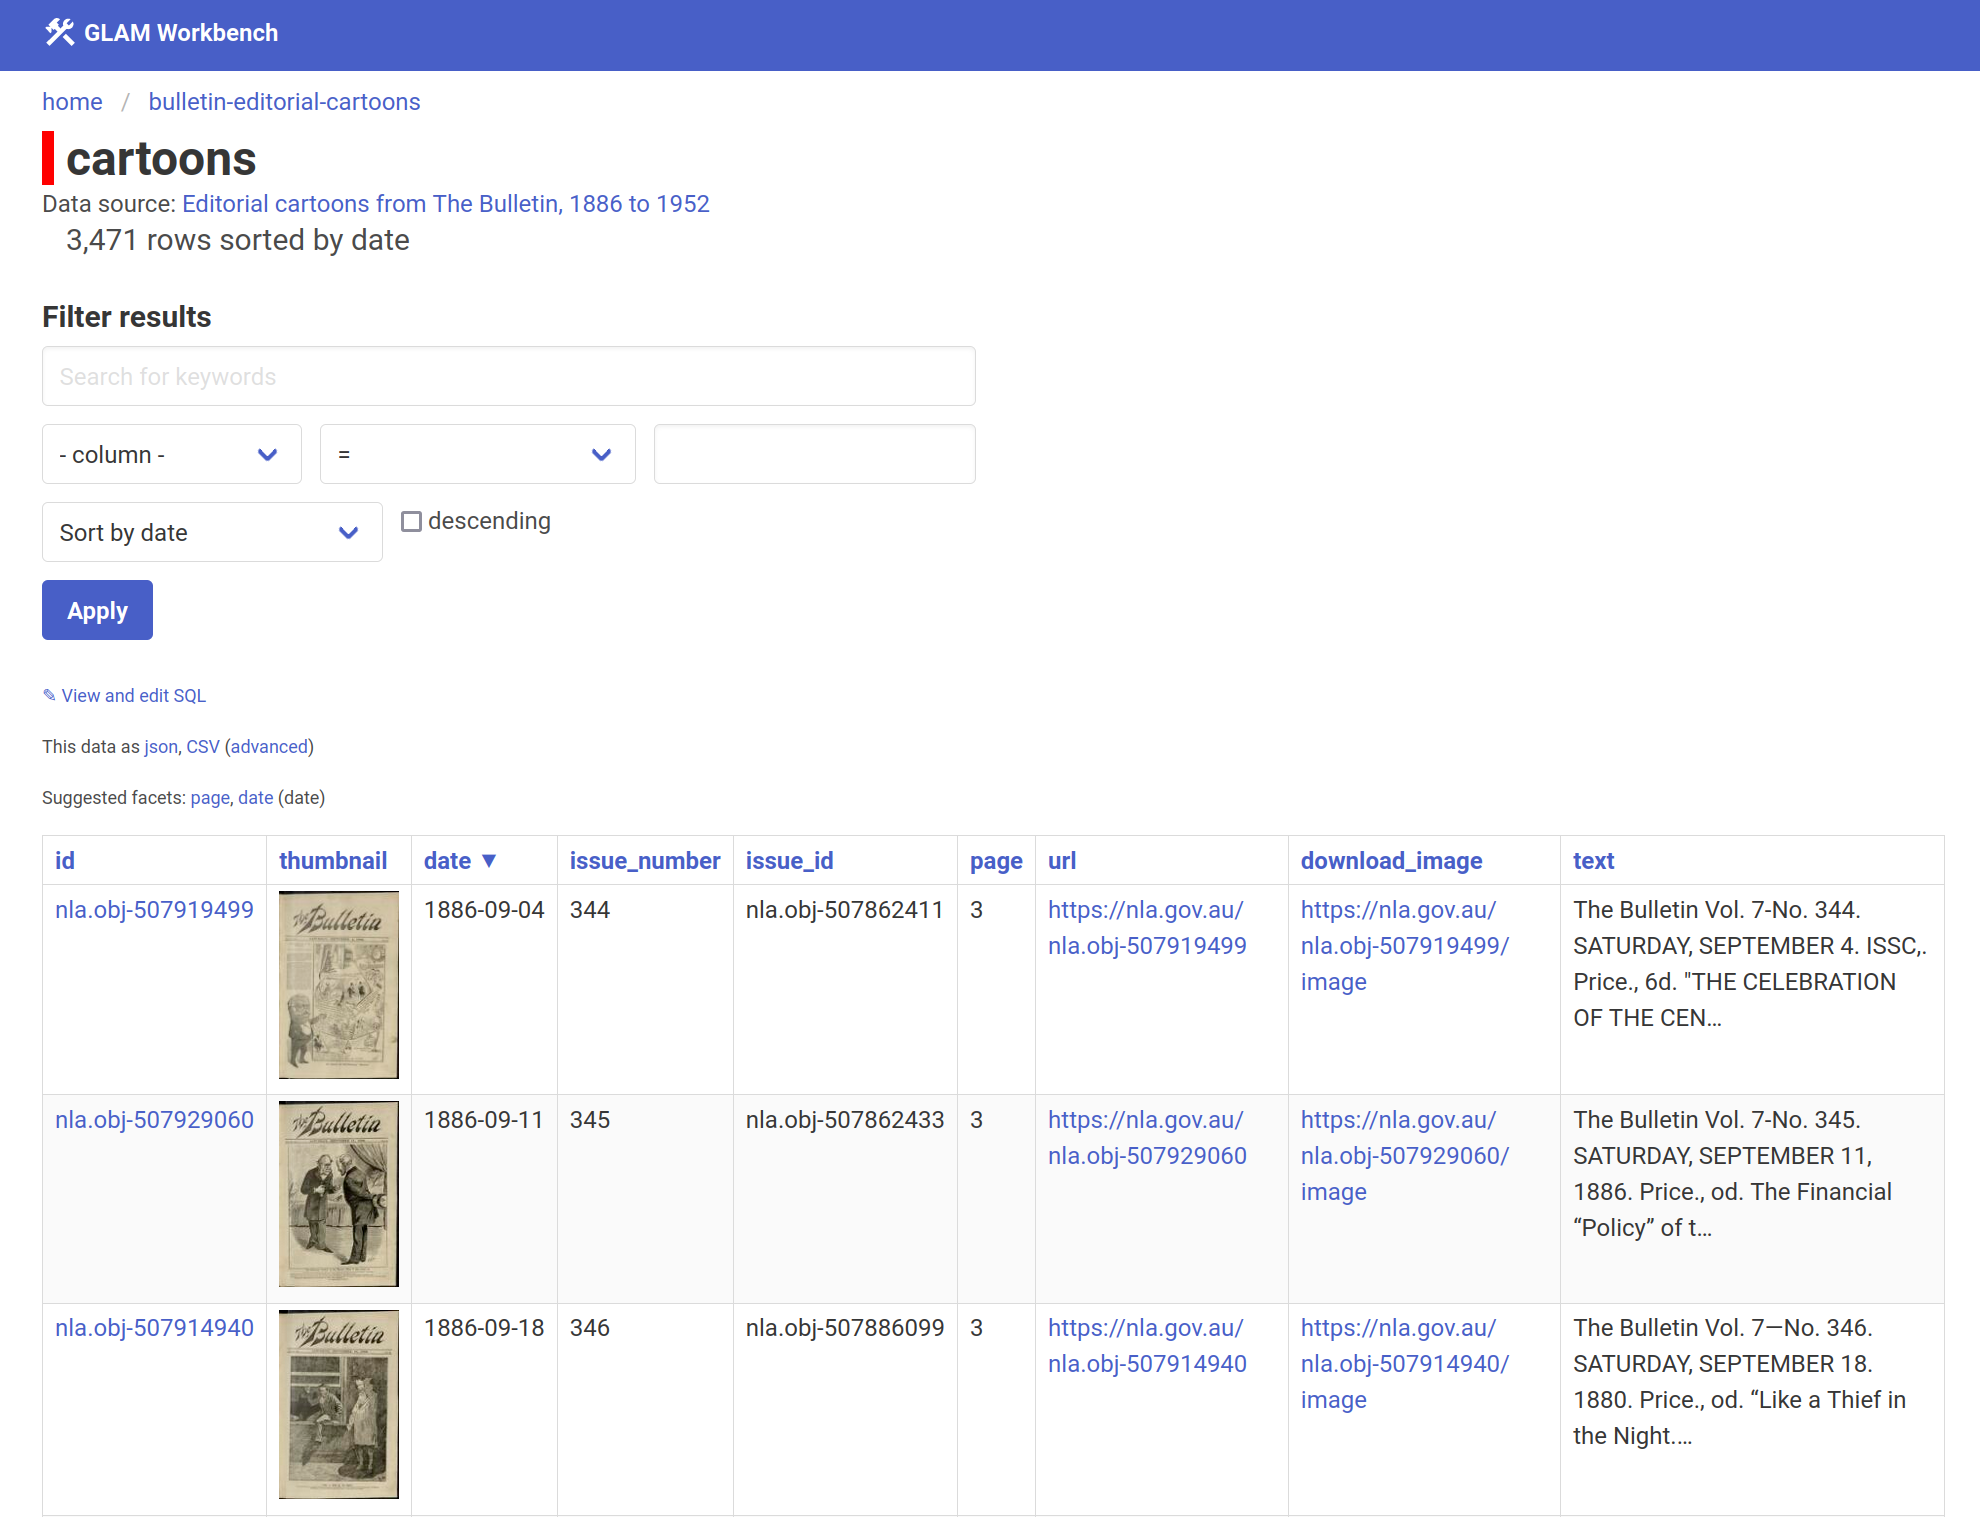 Screen capture of Datasette-Lite interface showing some of the Bulletin cartoons.